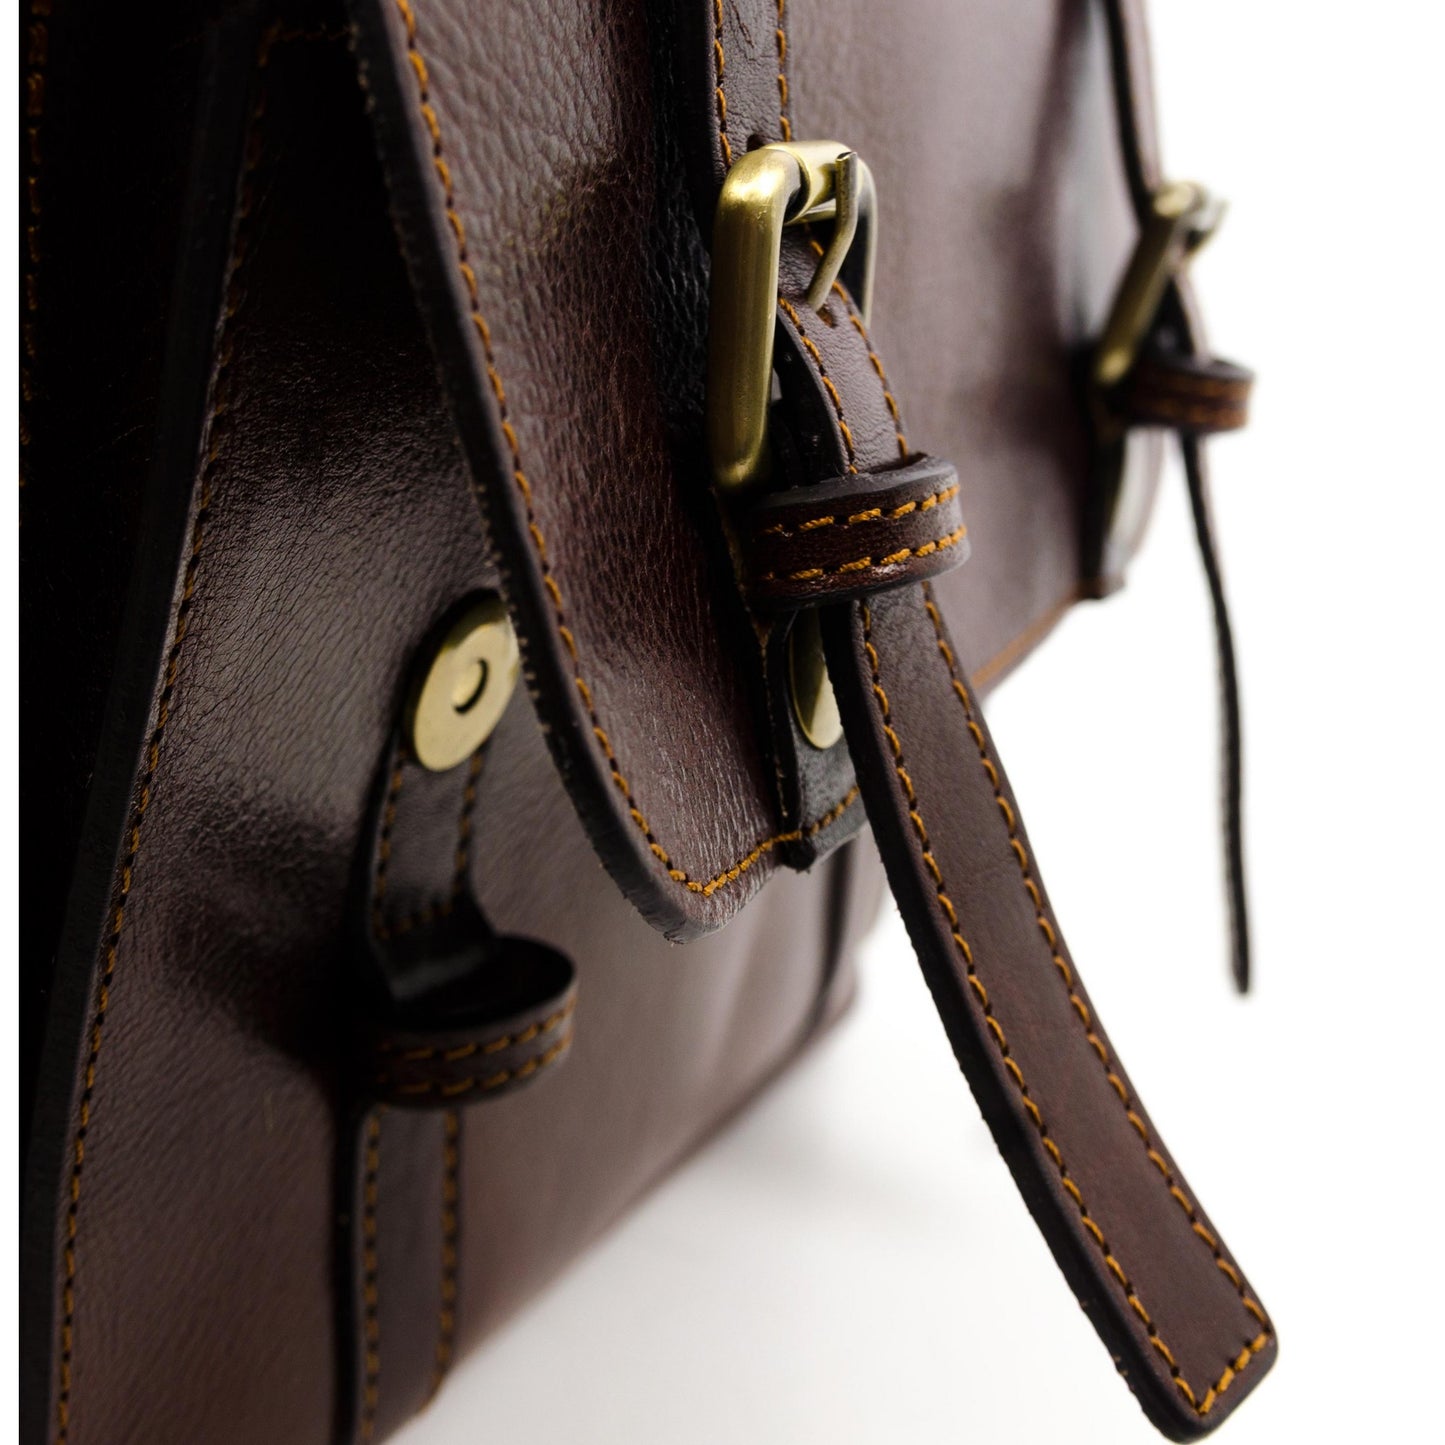 Large Unisex Leather Backpack - The Divine Comedy